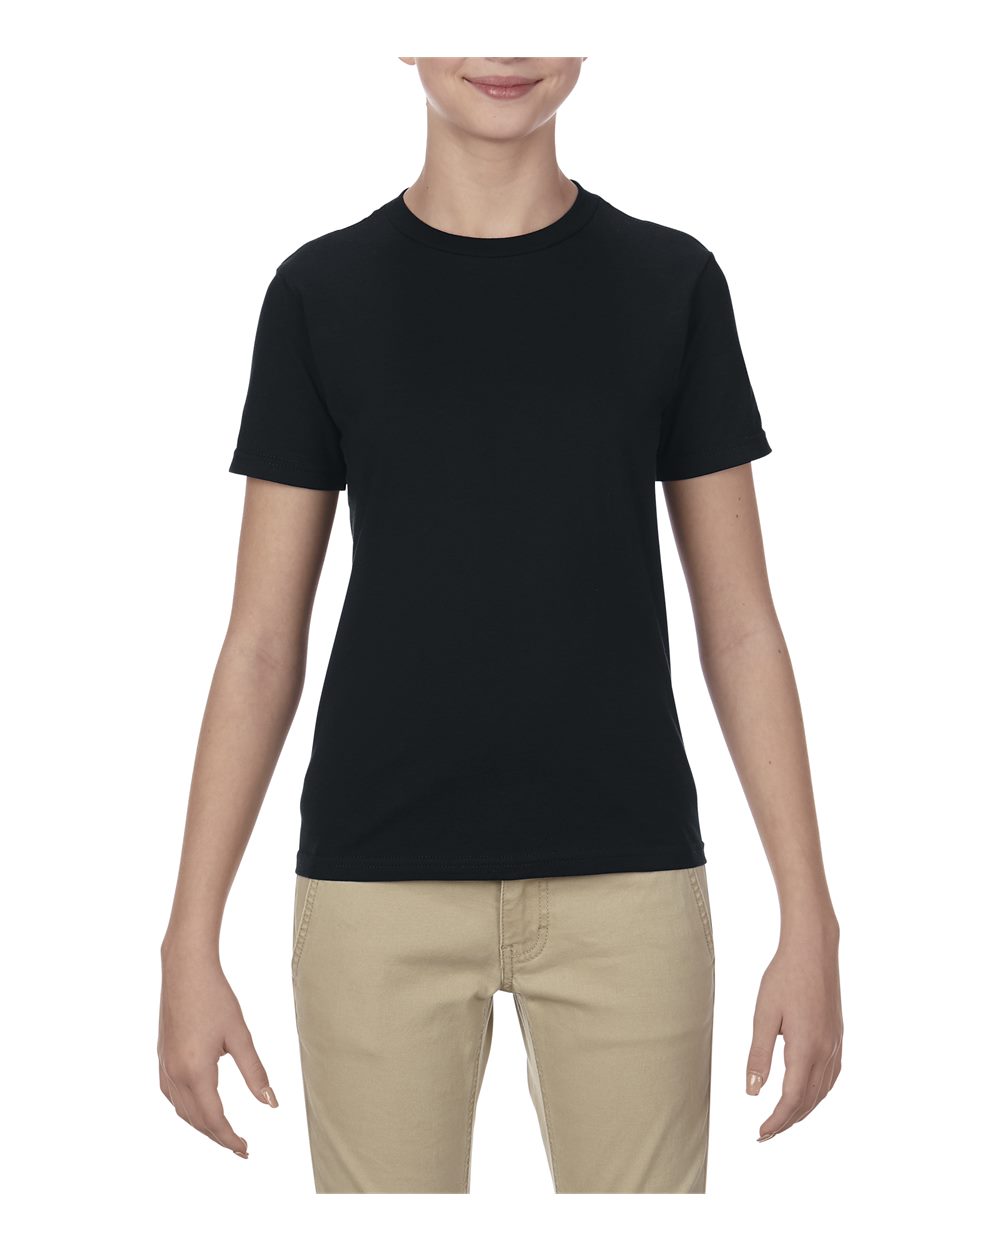 Alstyle 5081 - Youth Ultimate Tee